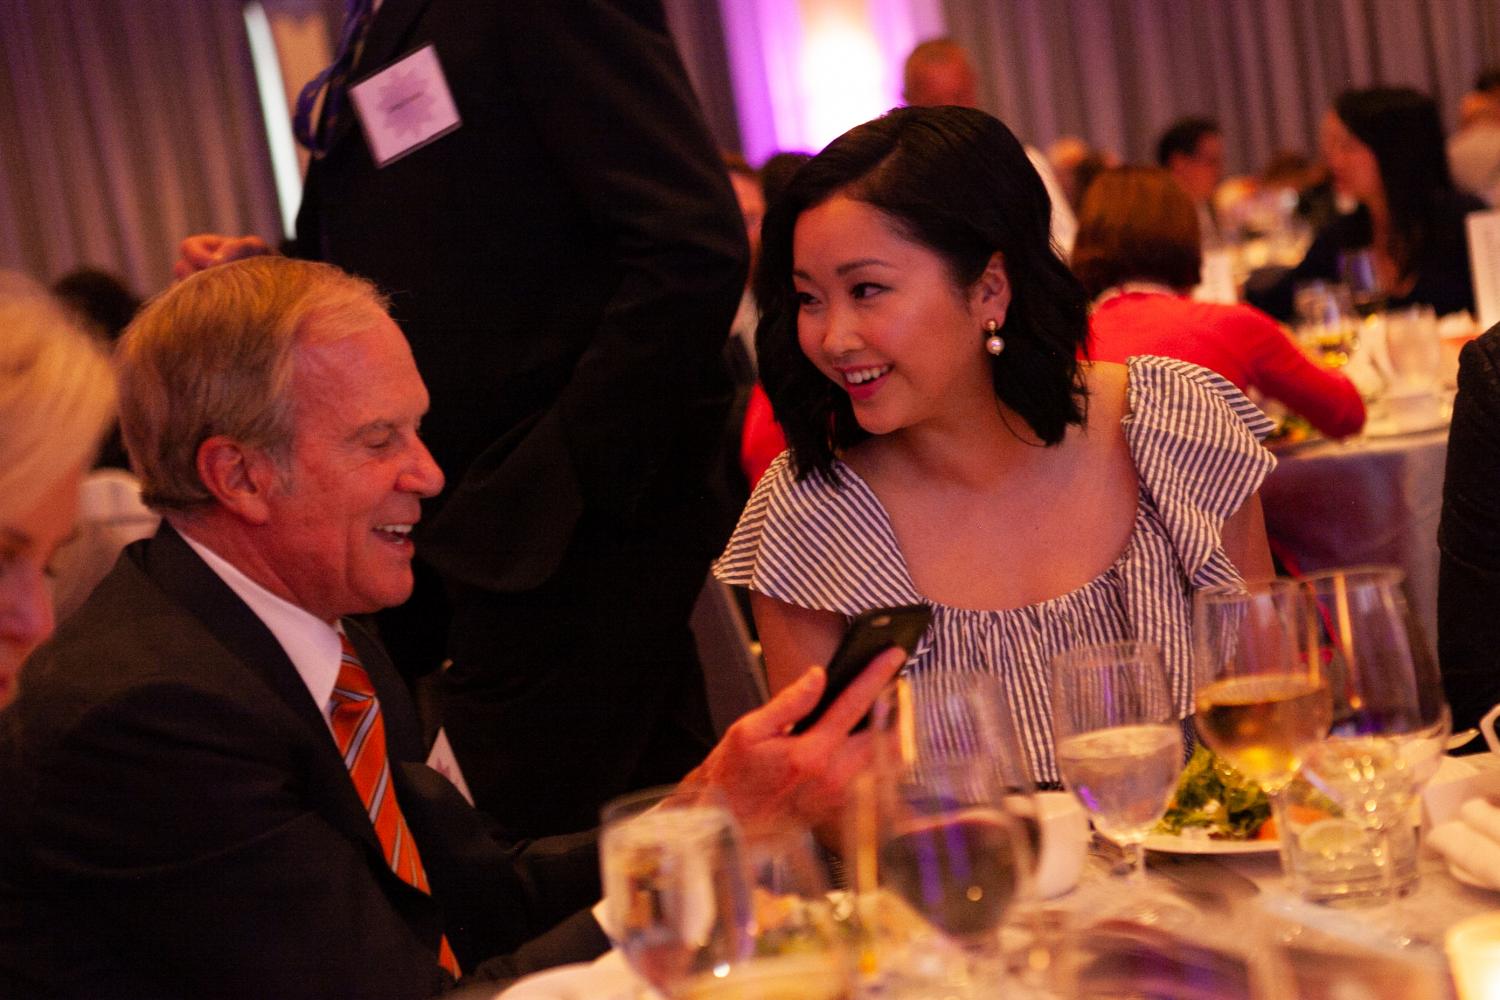 Jerome Dodson shows Lana Condor something on his phone